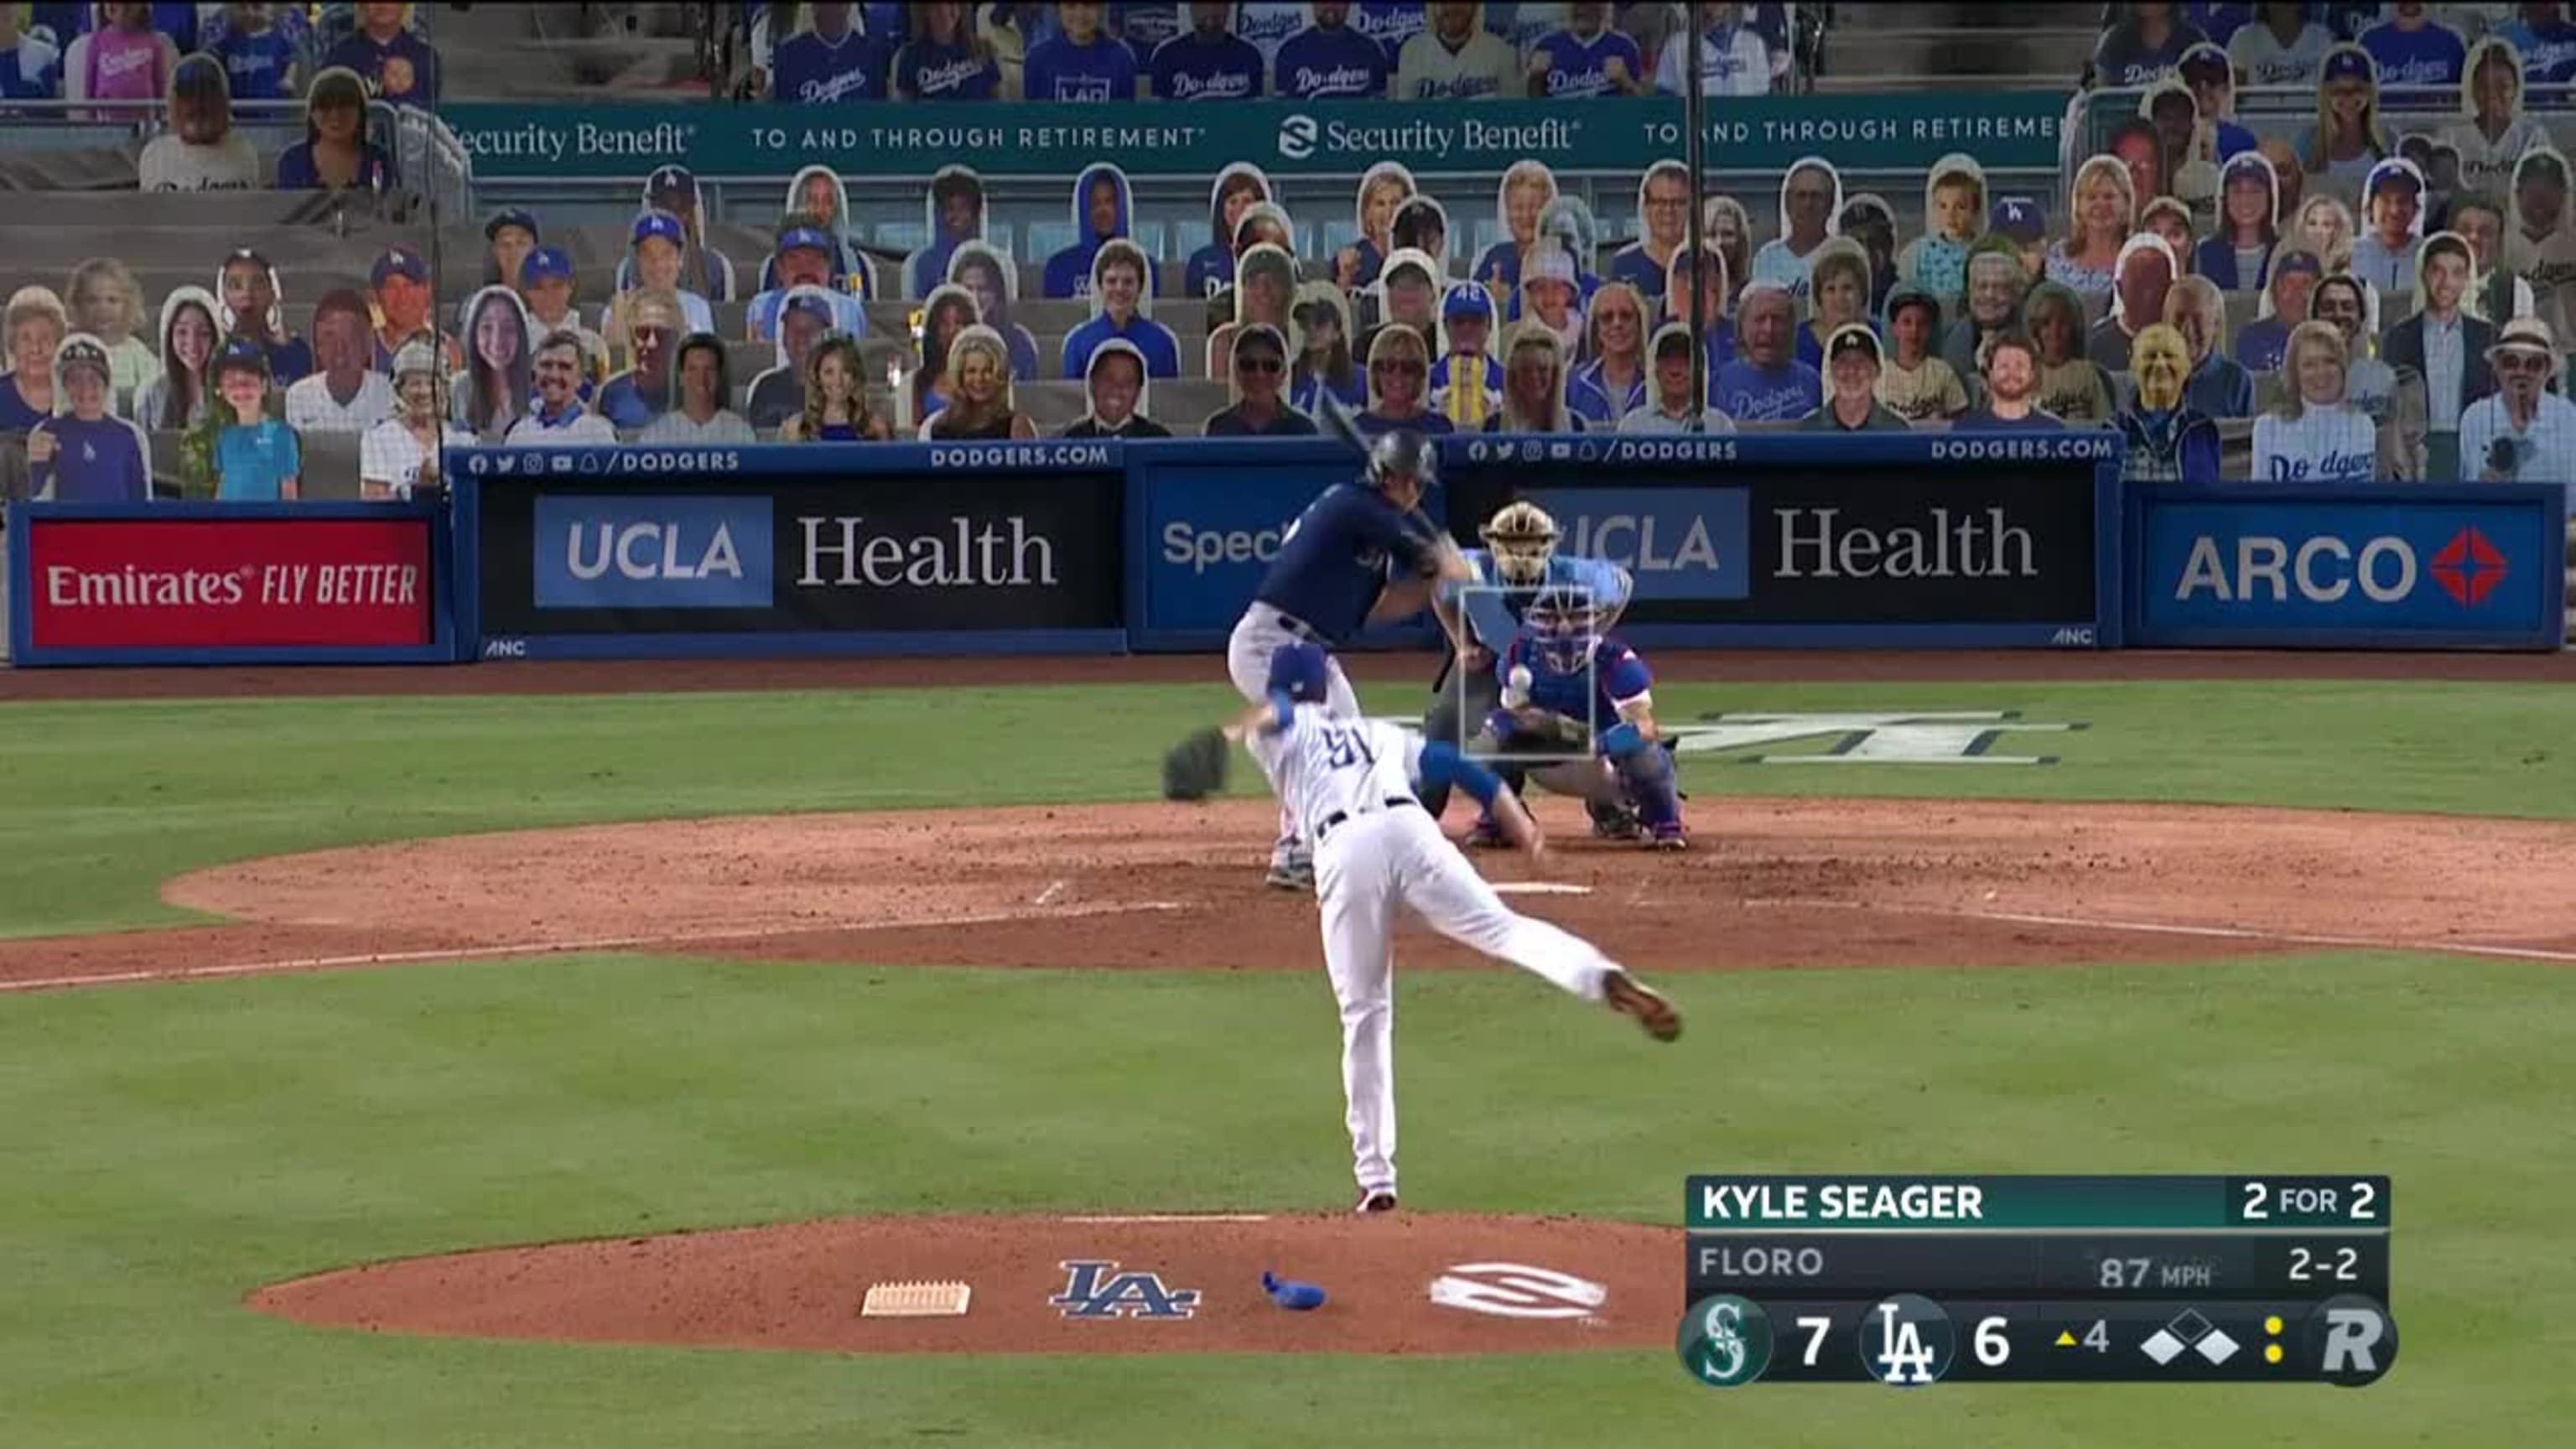 Corey Seager & Kyle Seager, climbing the brothers home run list